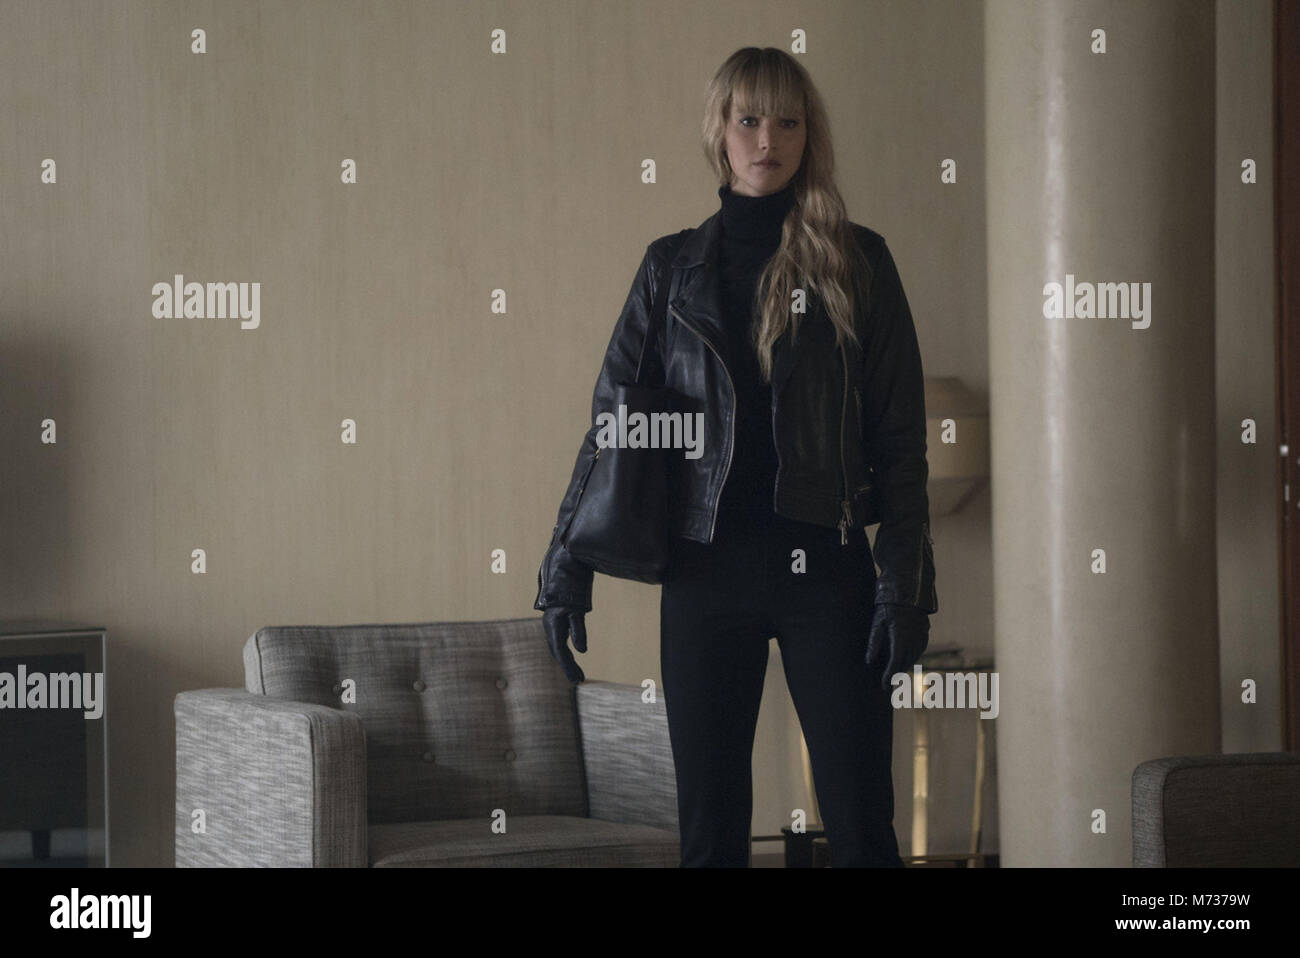 RED SPARROW (2018) Jennifer Lawrence Francis Lawrence (DIR) 20 TH CENTURY FOX/MOVIESTORE COLLECTION LTD. Stockfoto